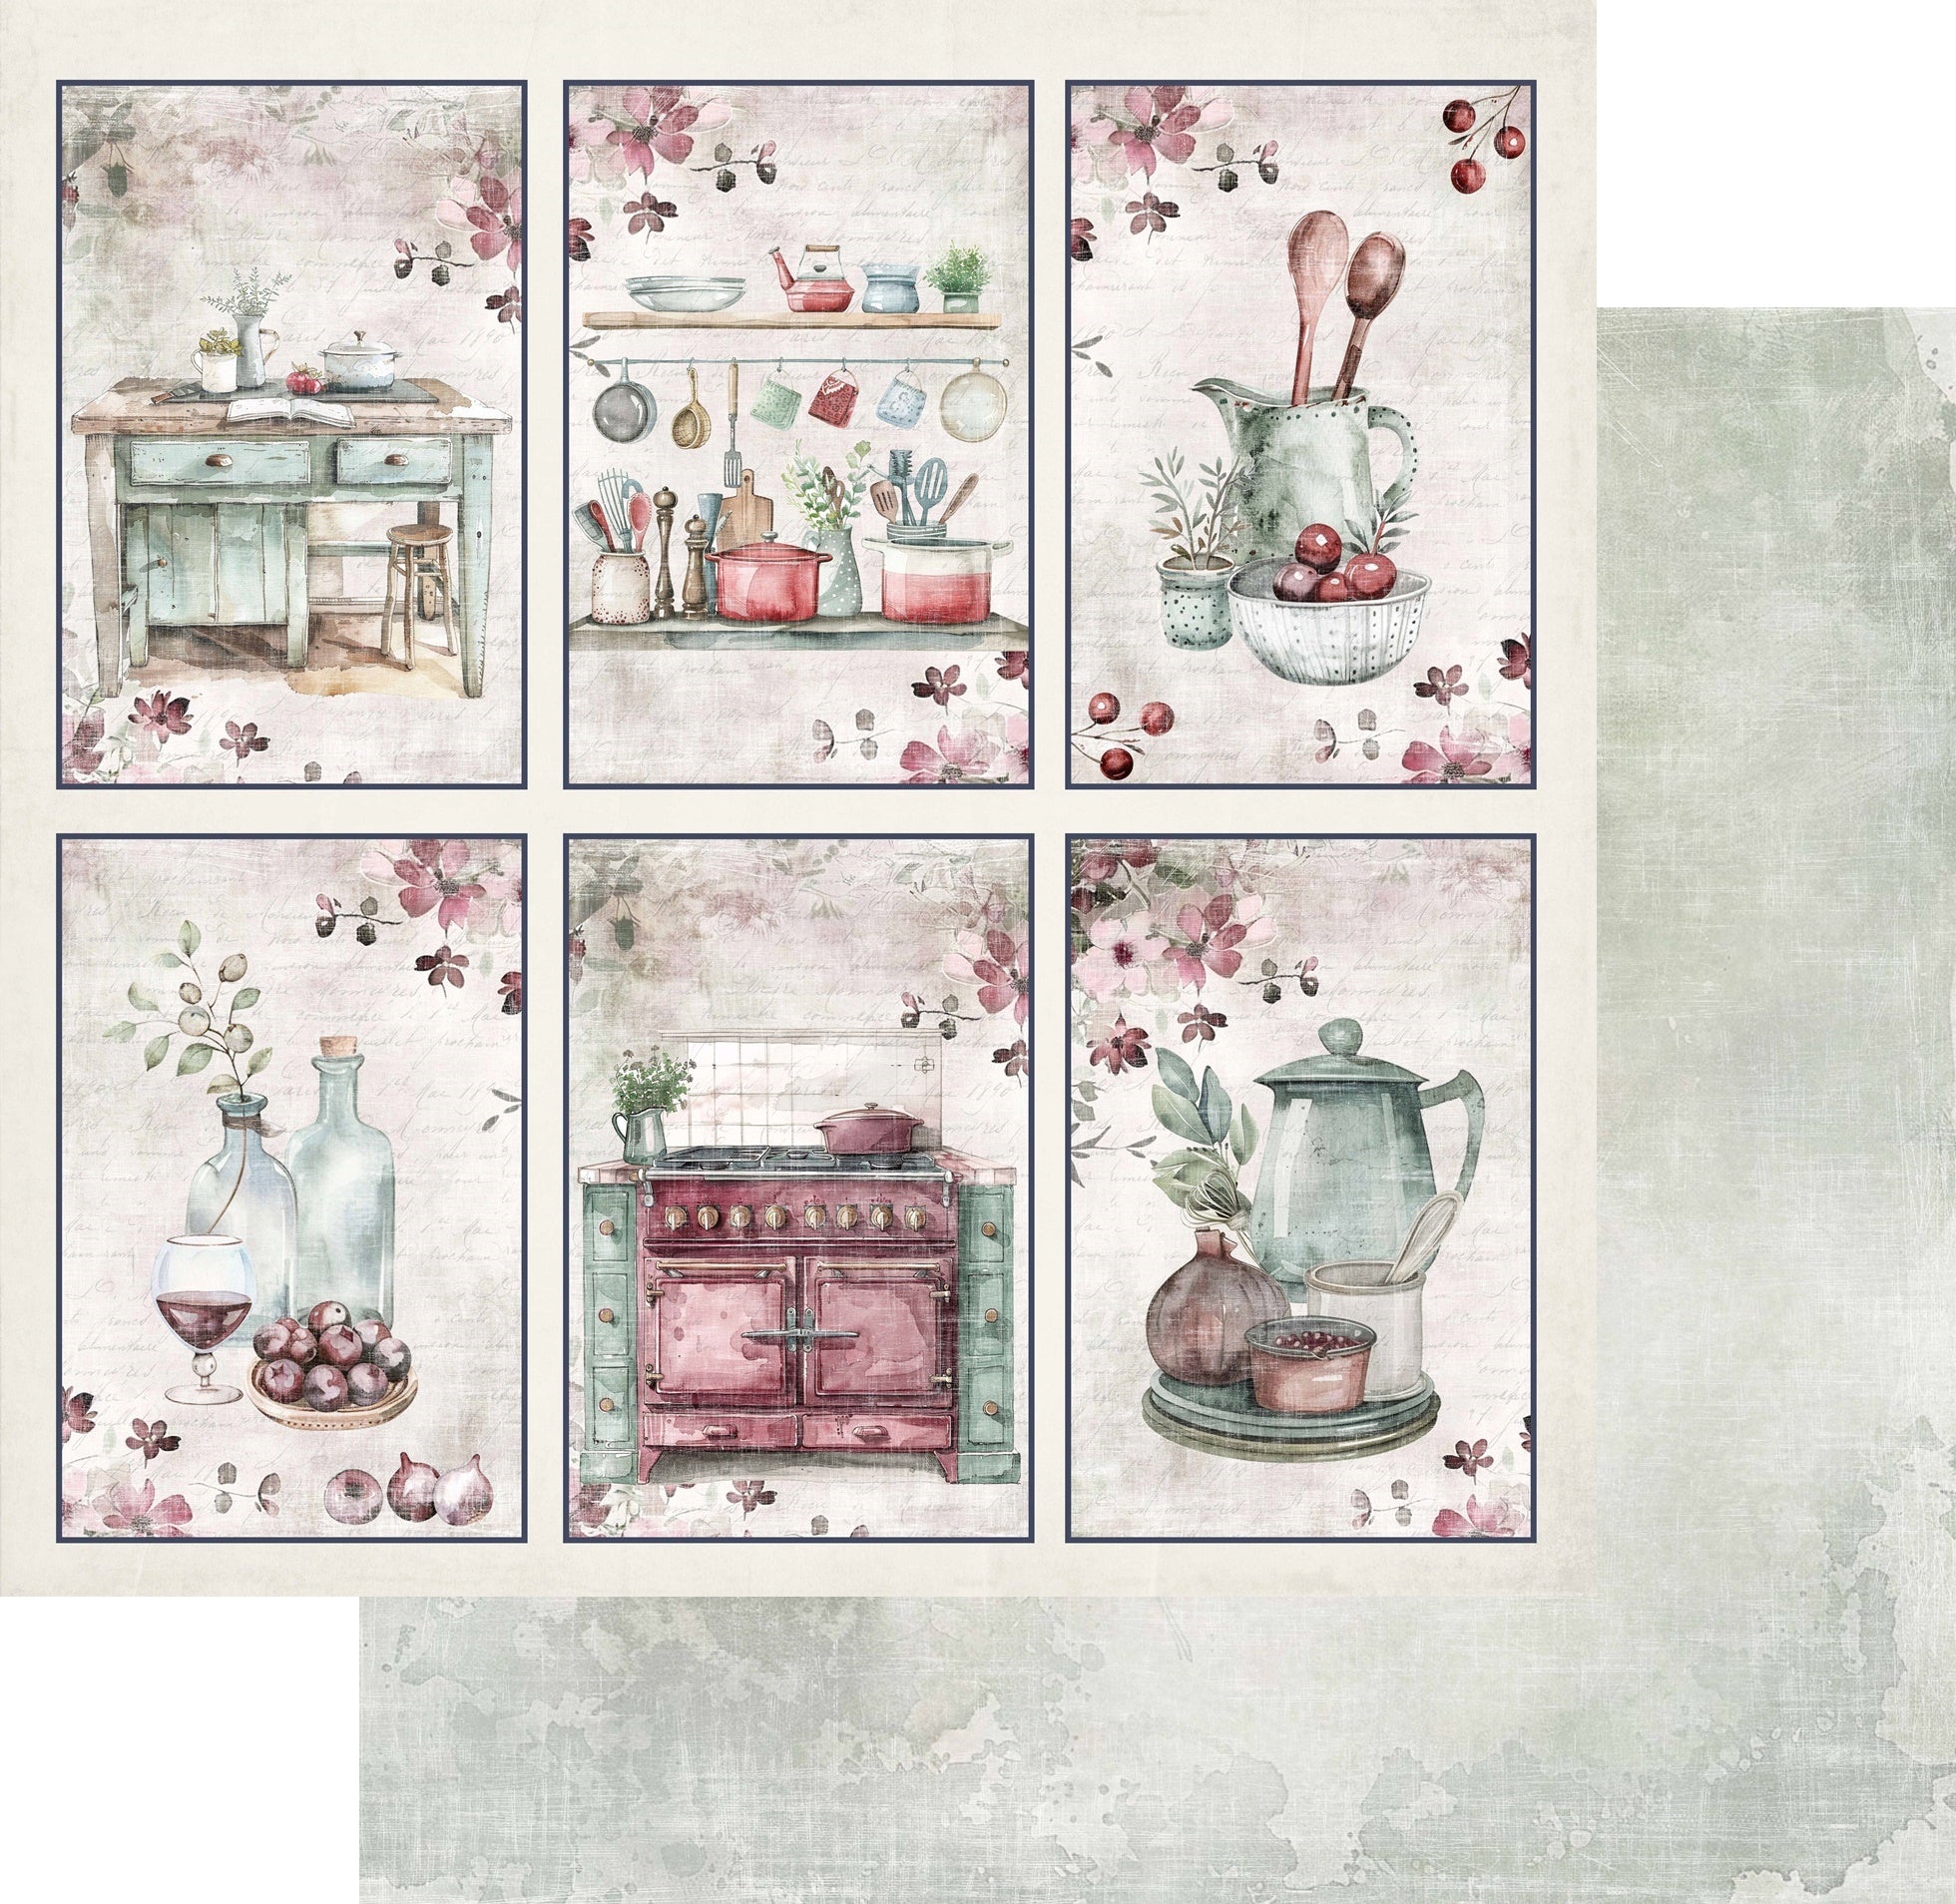 Reprint - Kitchen  Collection Pack - 12 x 12"